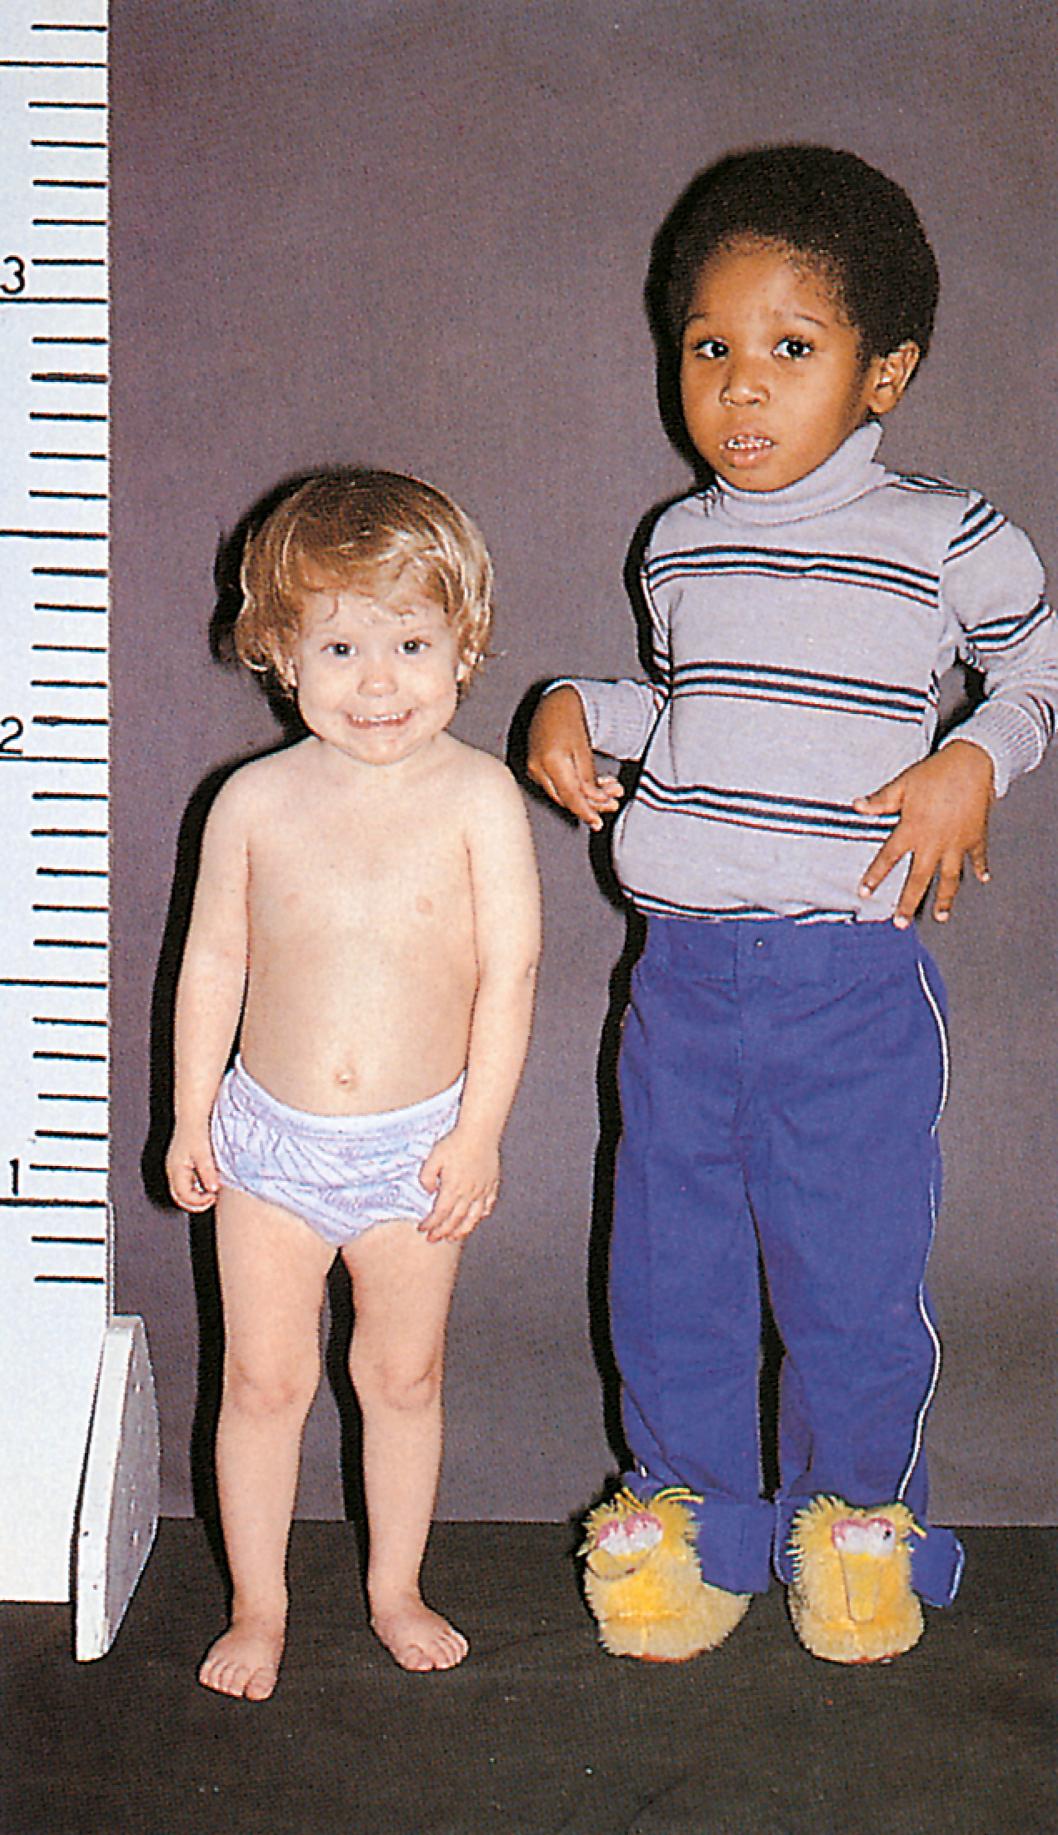 Fig. 9.19, Growth hormone (GH) deficiency. The normal boy (right) is in the 50th percentile for height. The short 3-year-old girl (left) has GH deficiency.